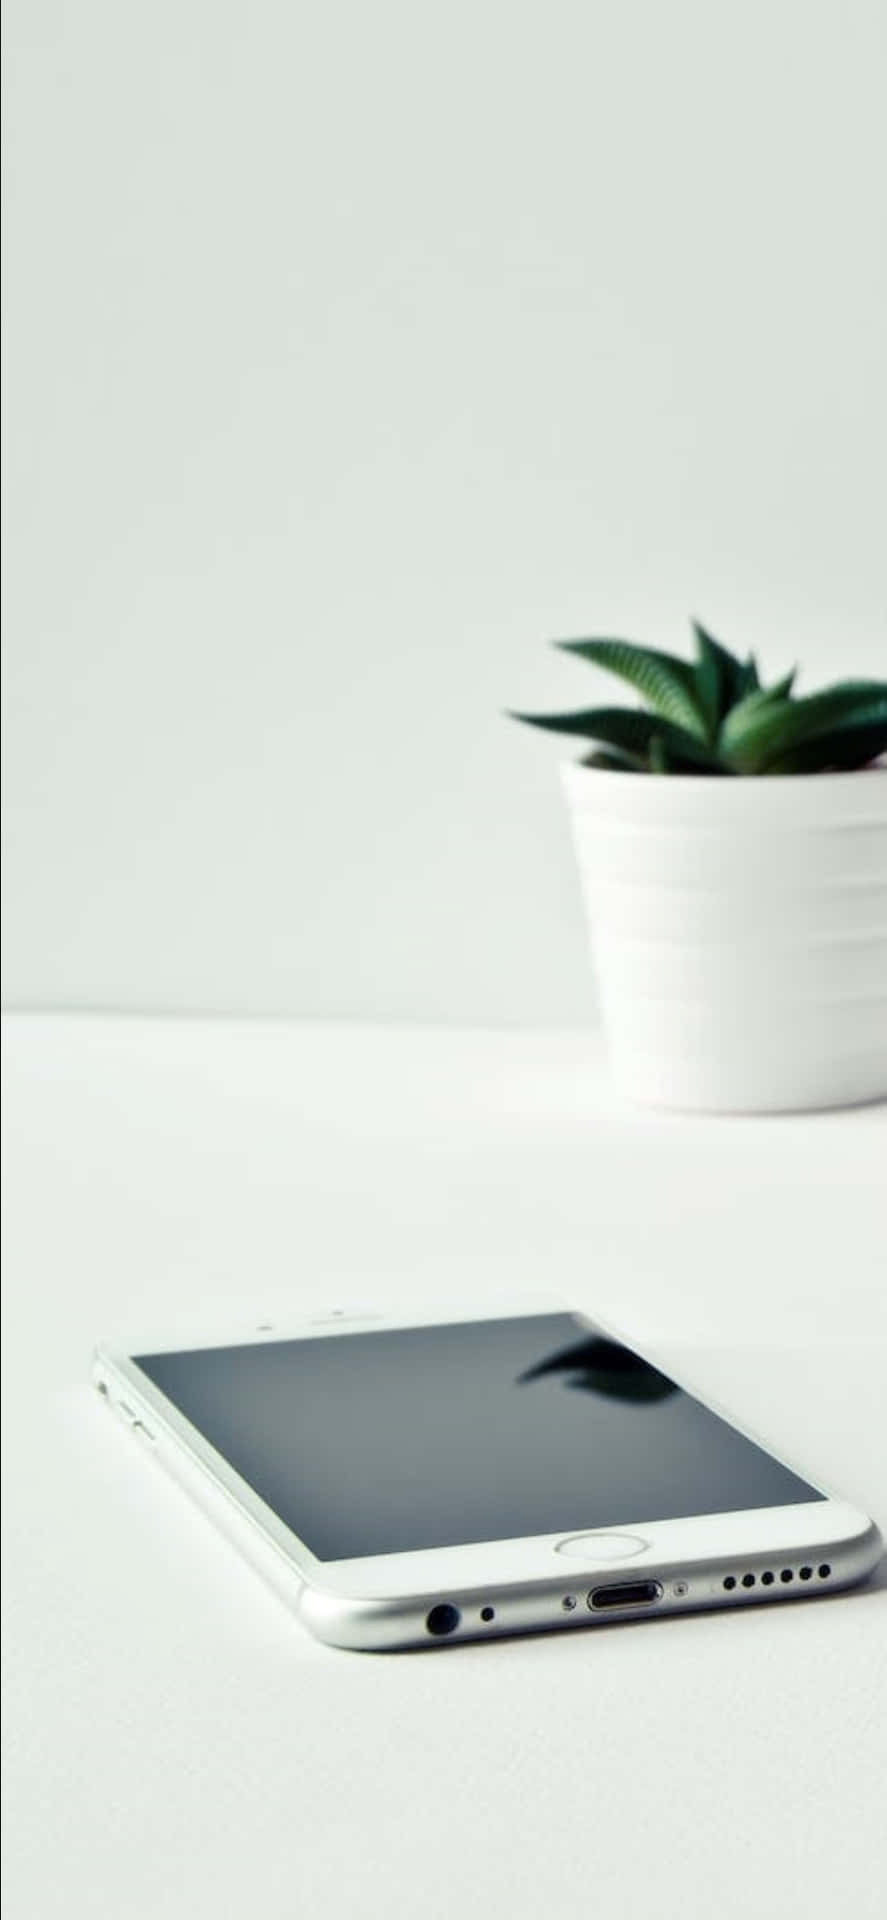 Iphone X Desk Background White Phone And A Plant